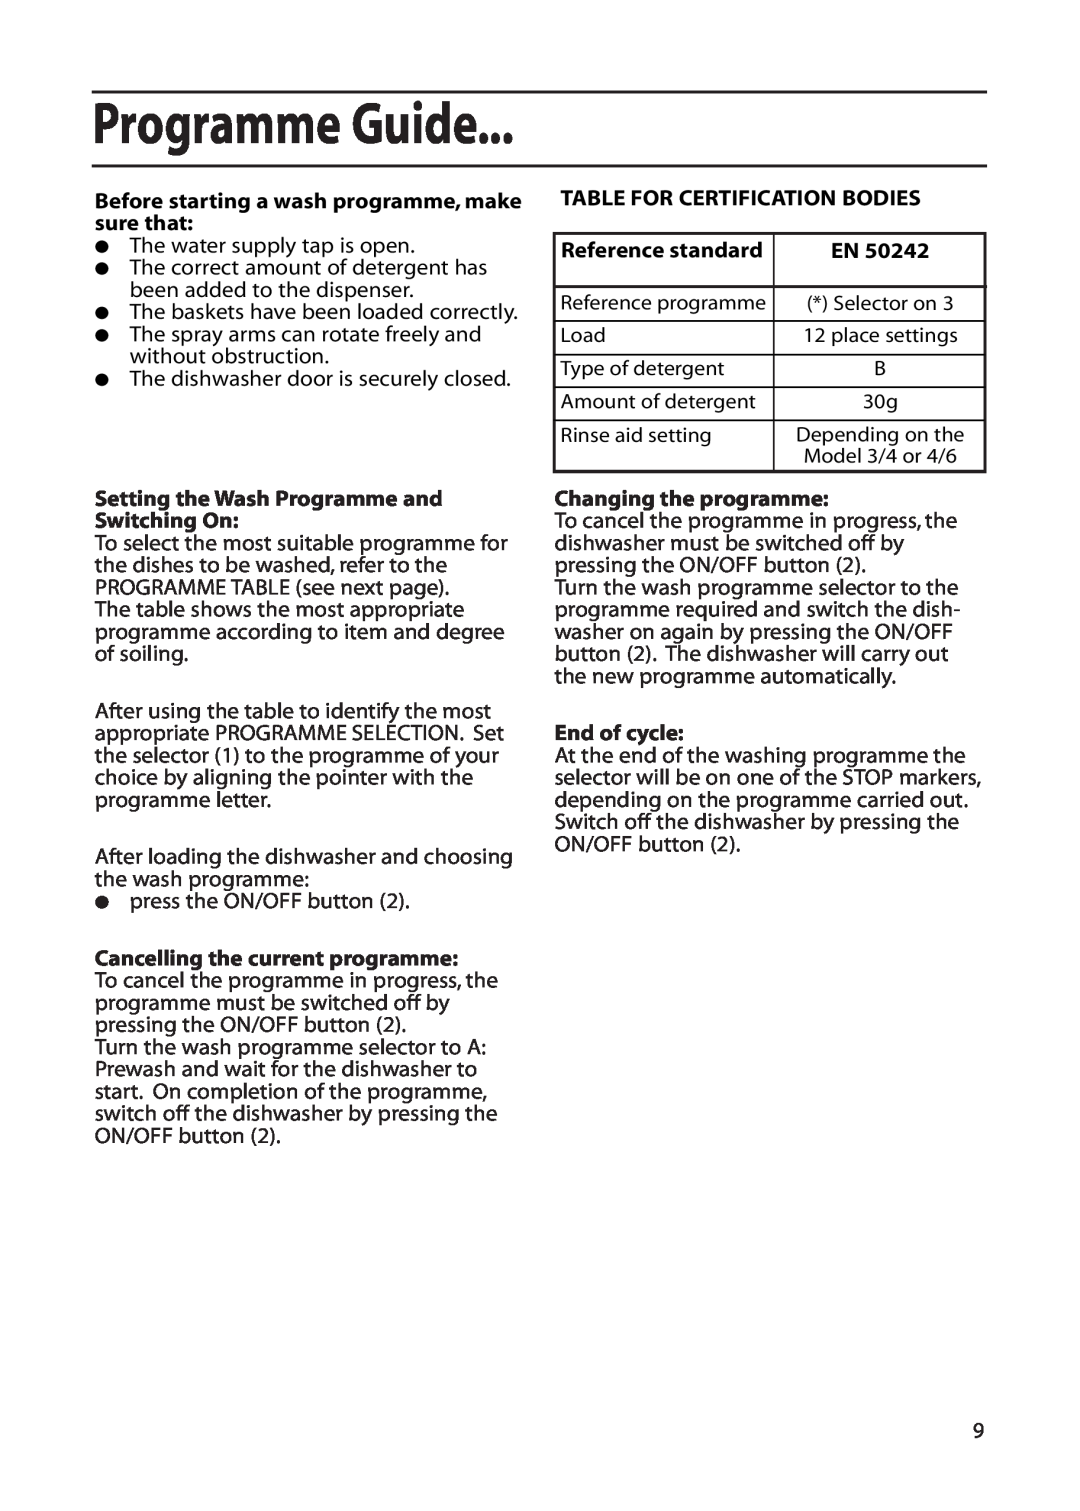 Hotpoint DF55, DF56 Programme Guide, Before starting a wash programme, make sure that, Cancelling the current programme 